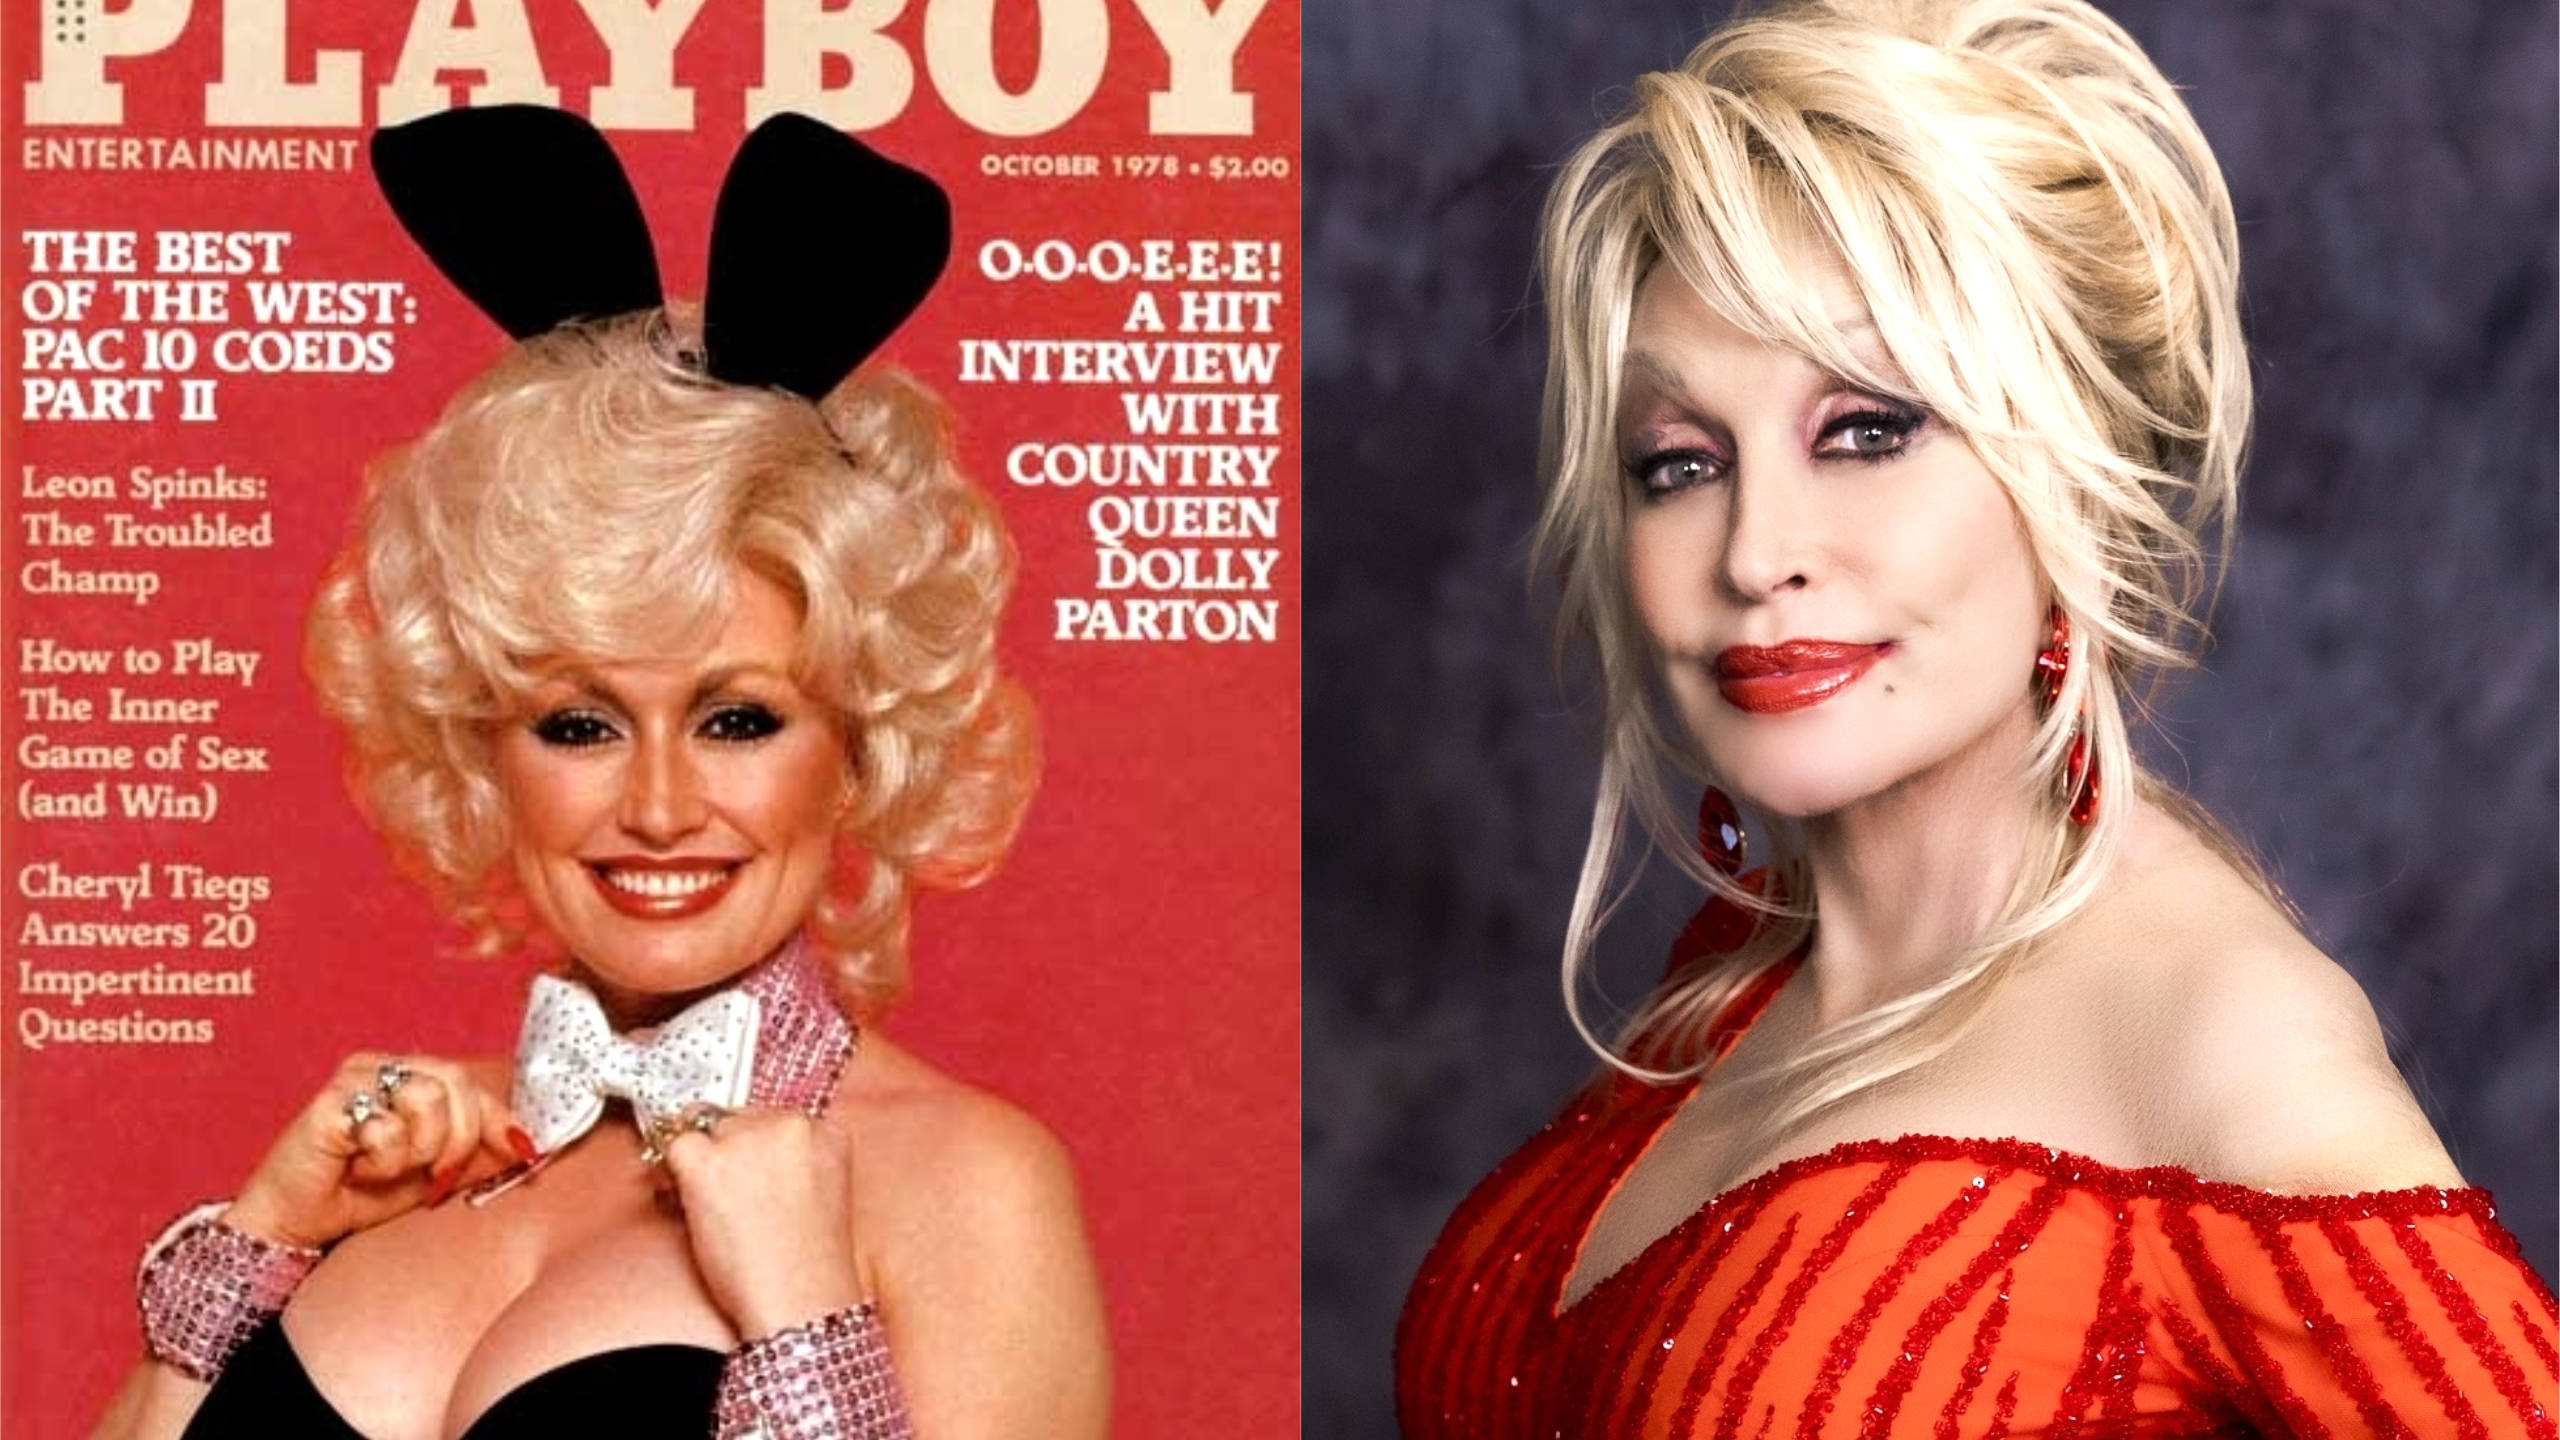 Dolly Parton Is In Talks To Pose For Playboy More Than 40 Years After Iconi...